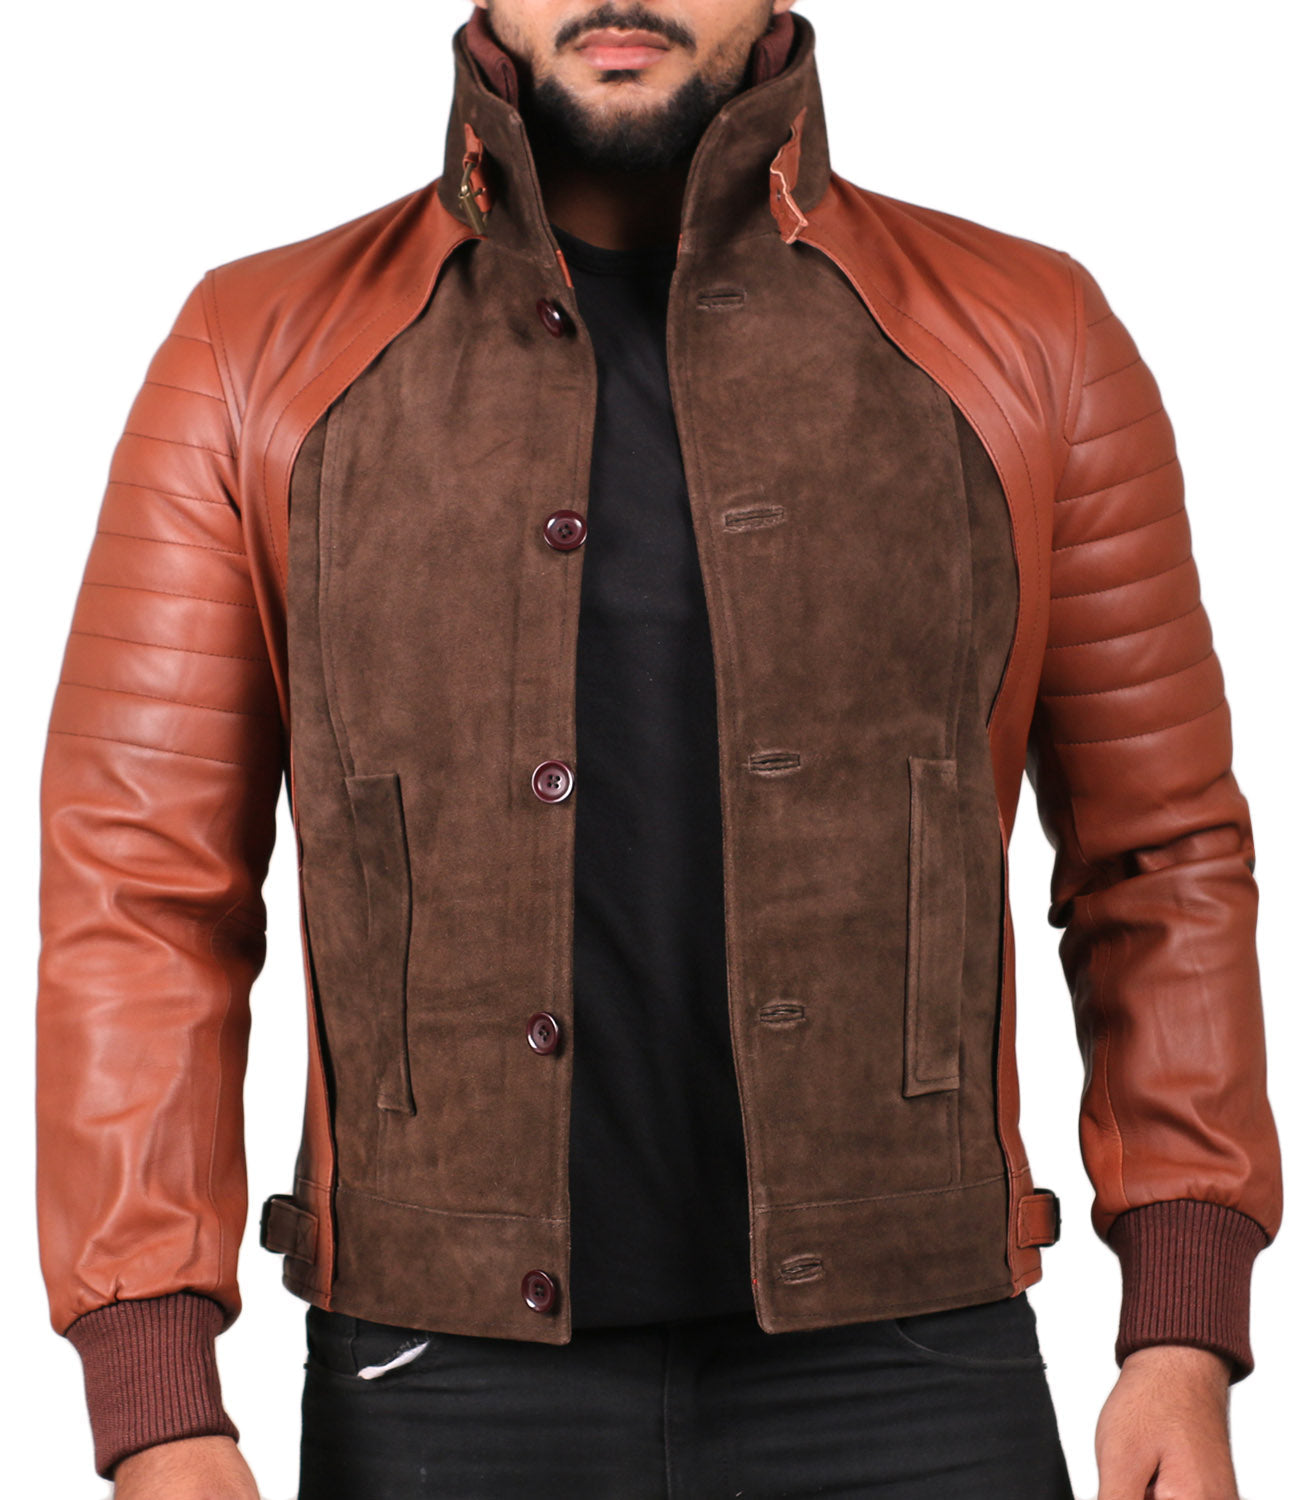 Leather Jackets Hub Mens Genuine Cow Suede Leather Jacket (Suede-Tan, Fencing Jacket) - 1501766